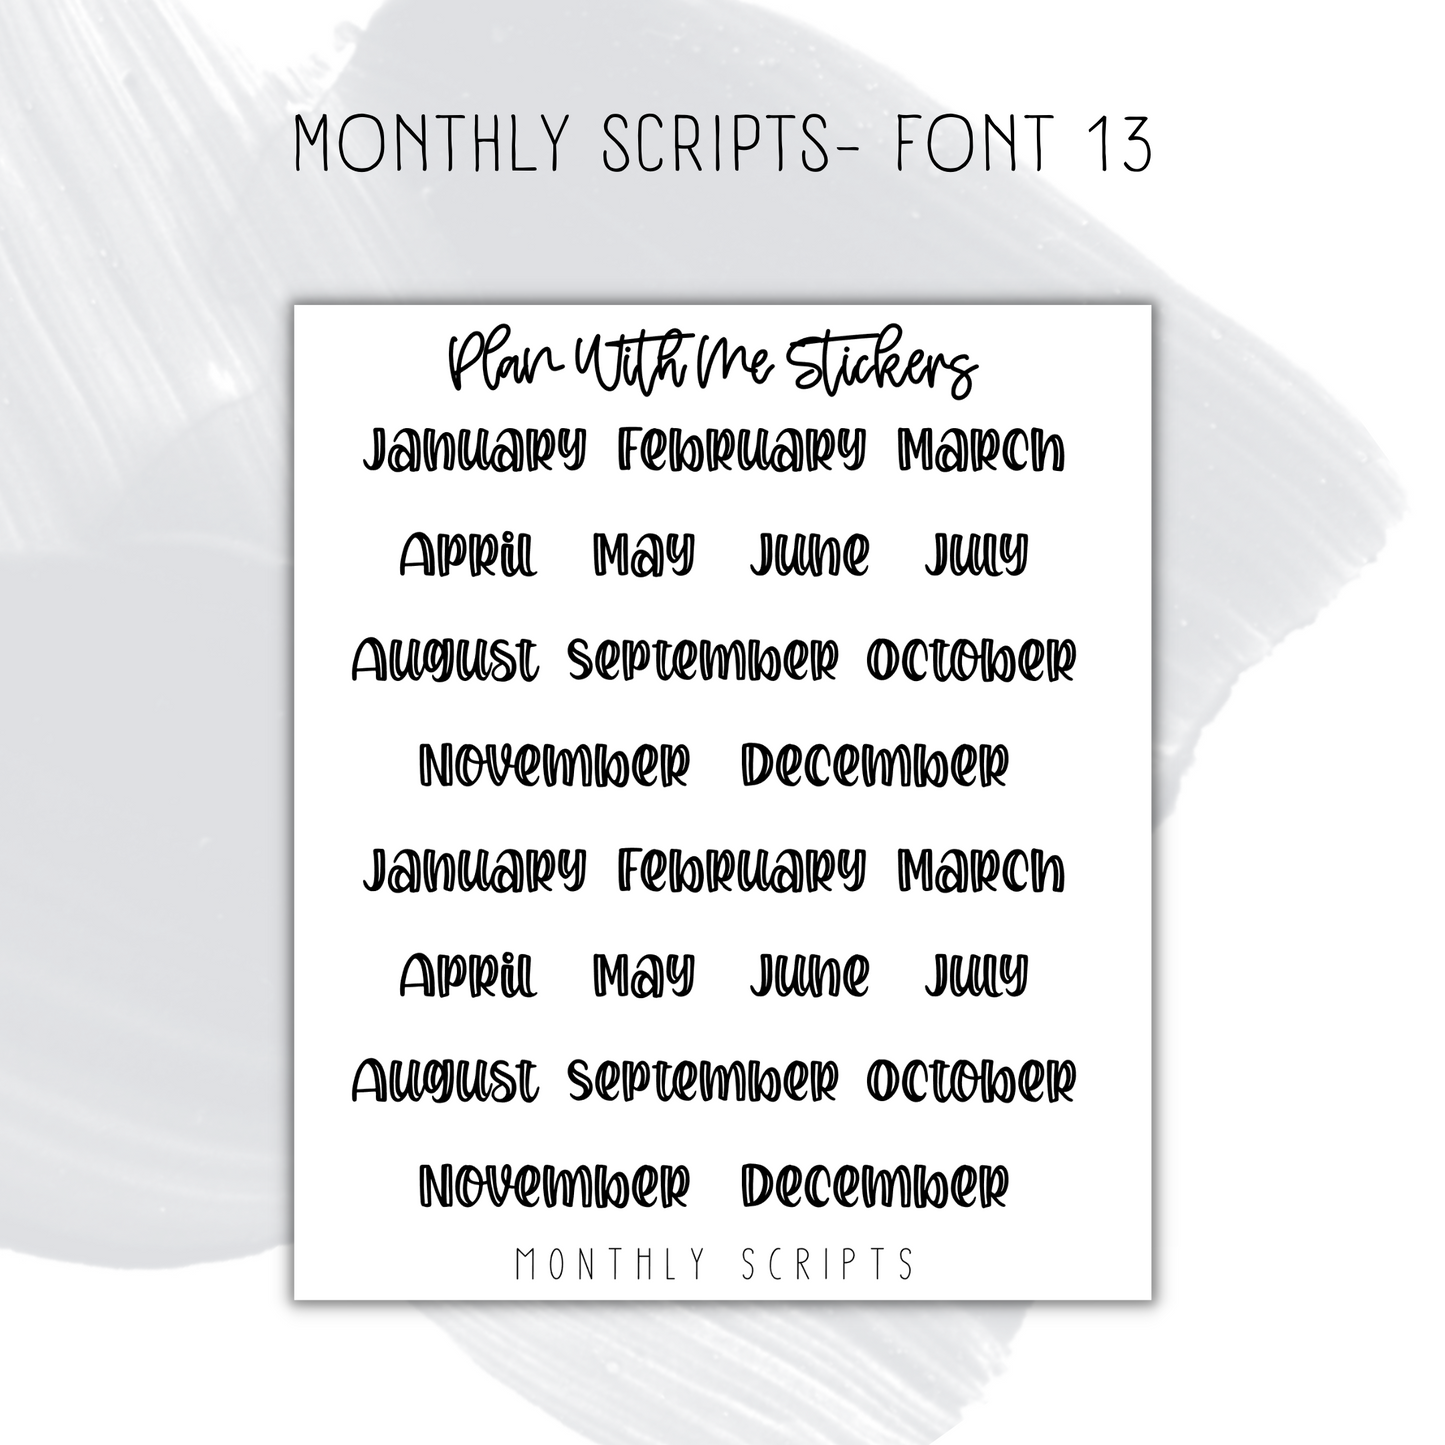 Monthly Scripts- Font 13